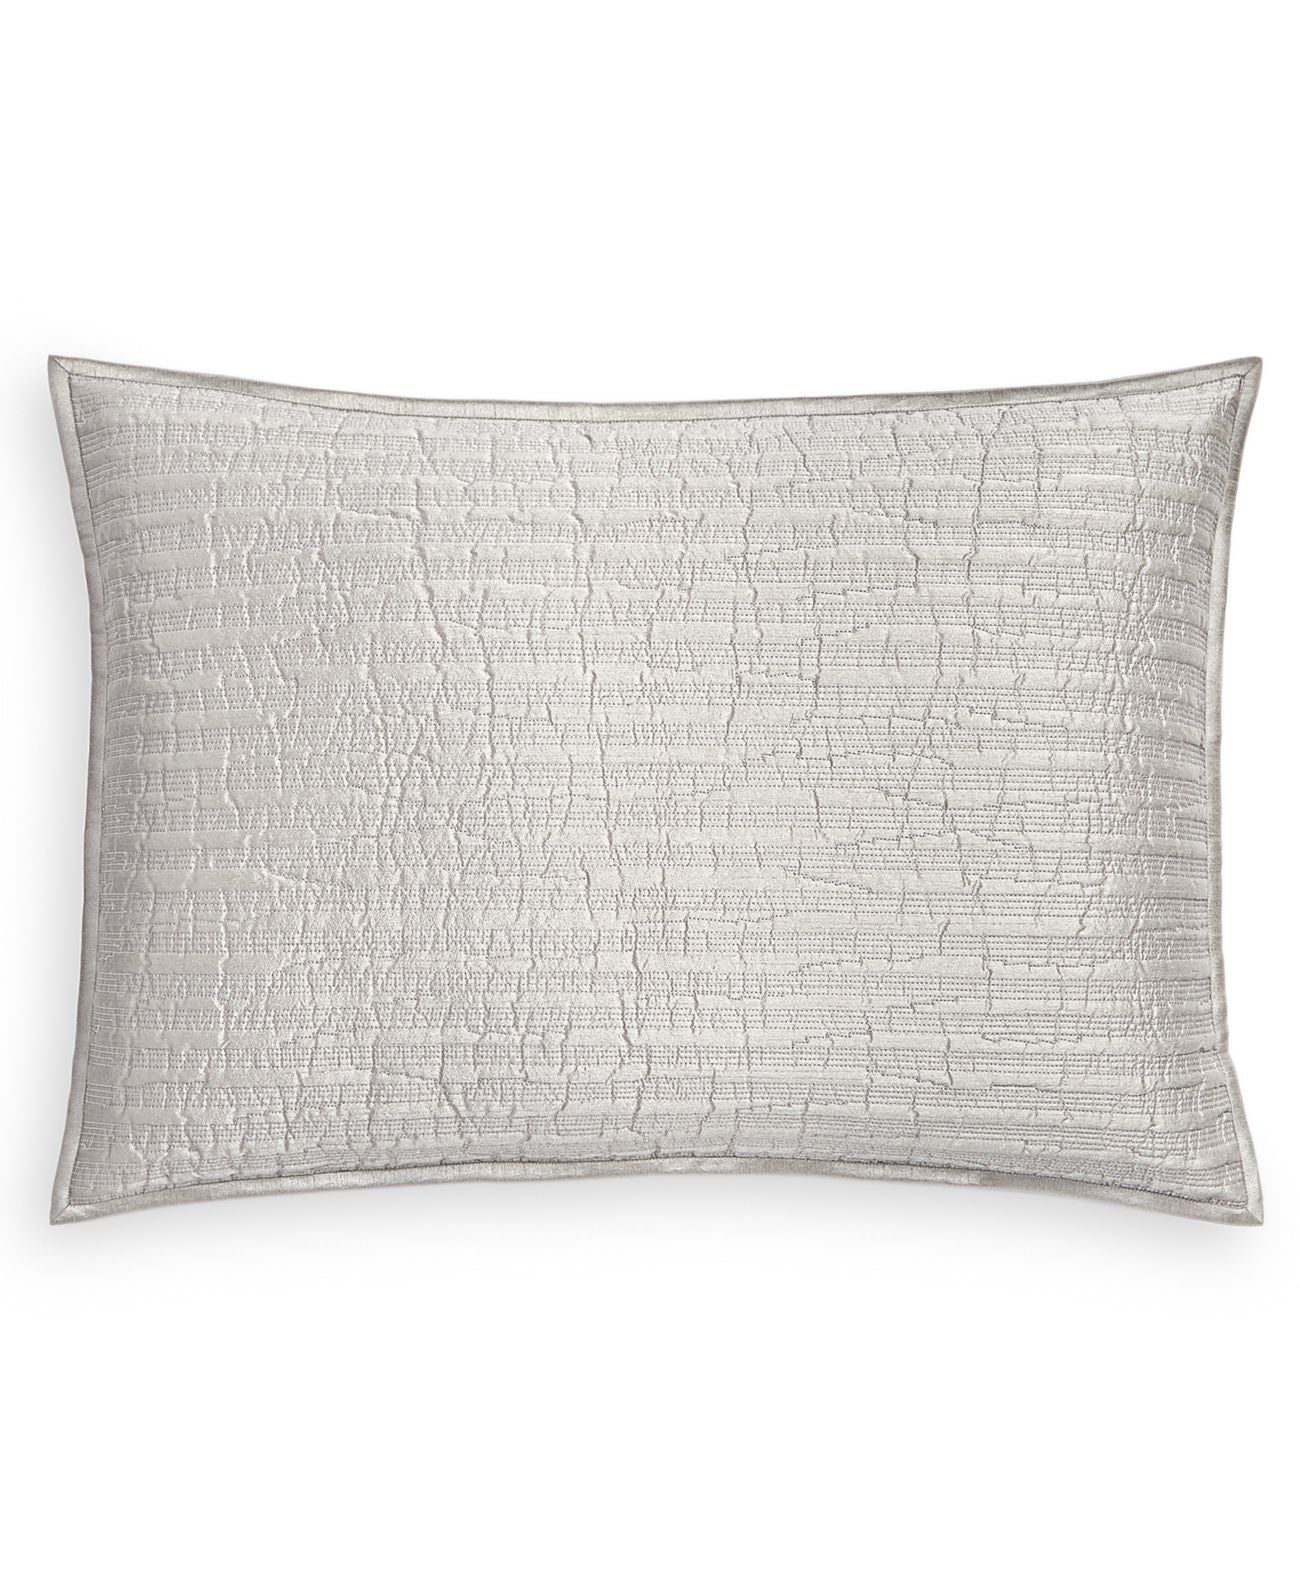 Hotel Collection Silverwood Quilted Bedding Sham